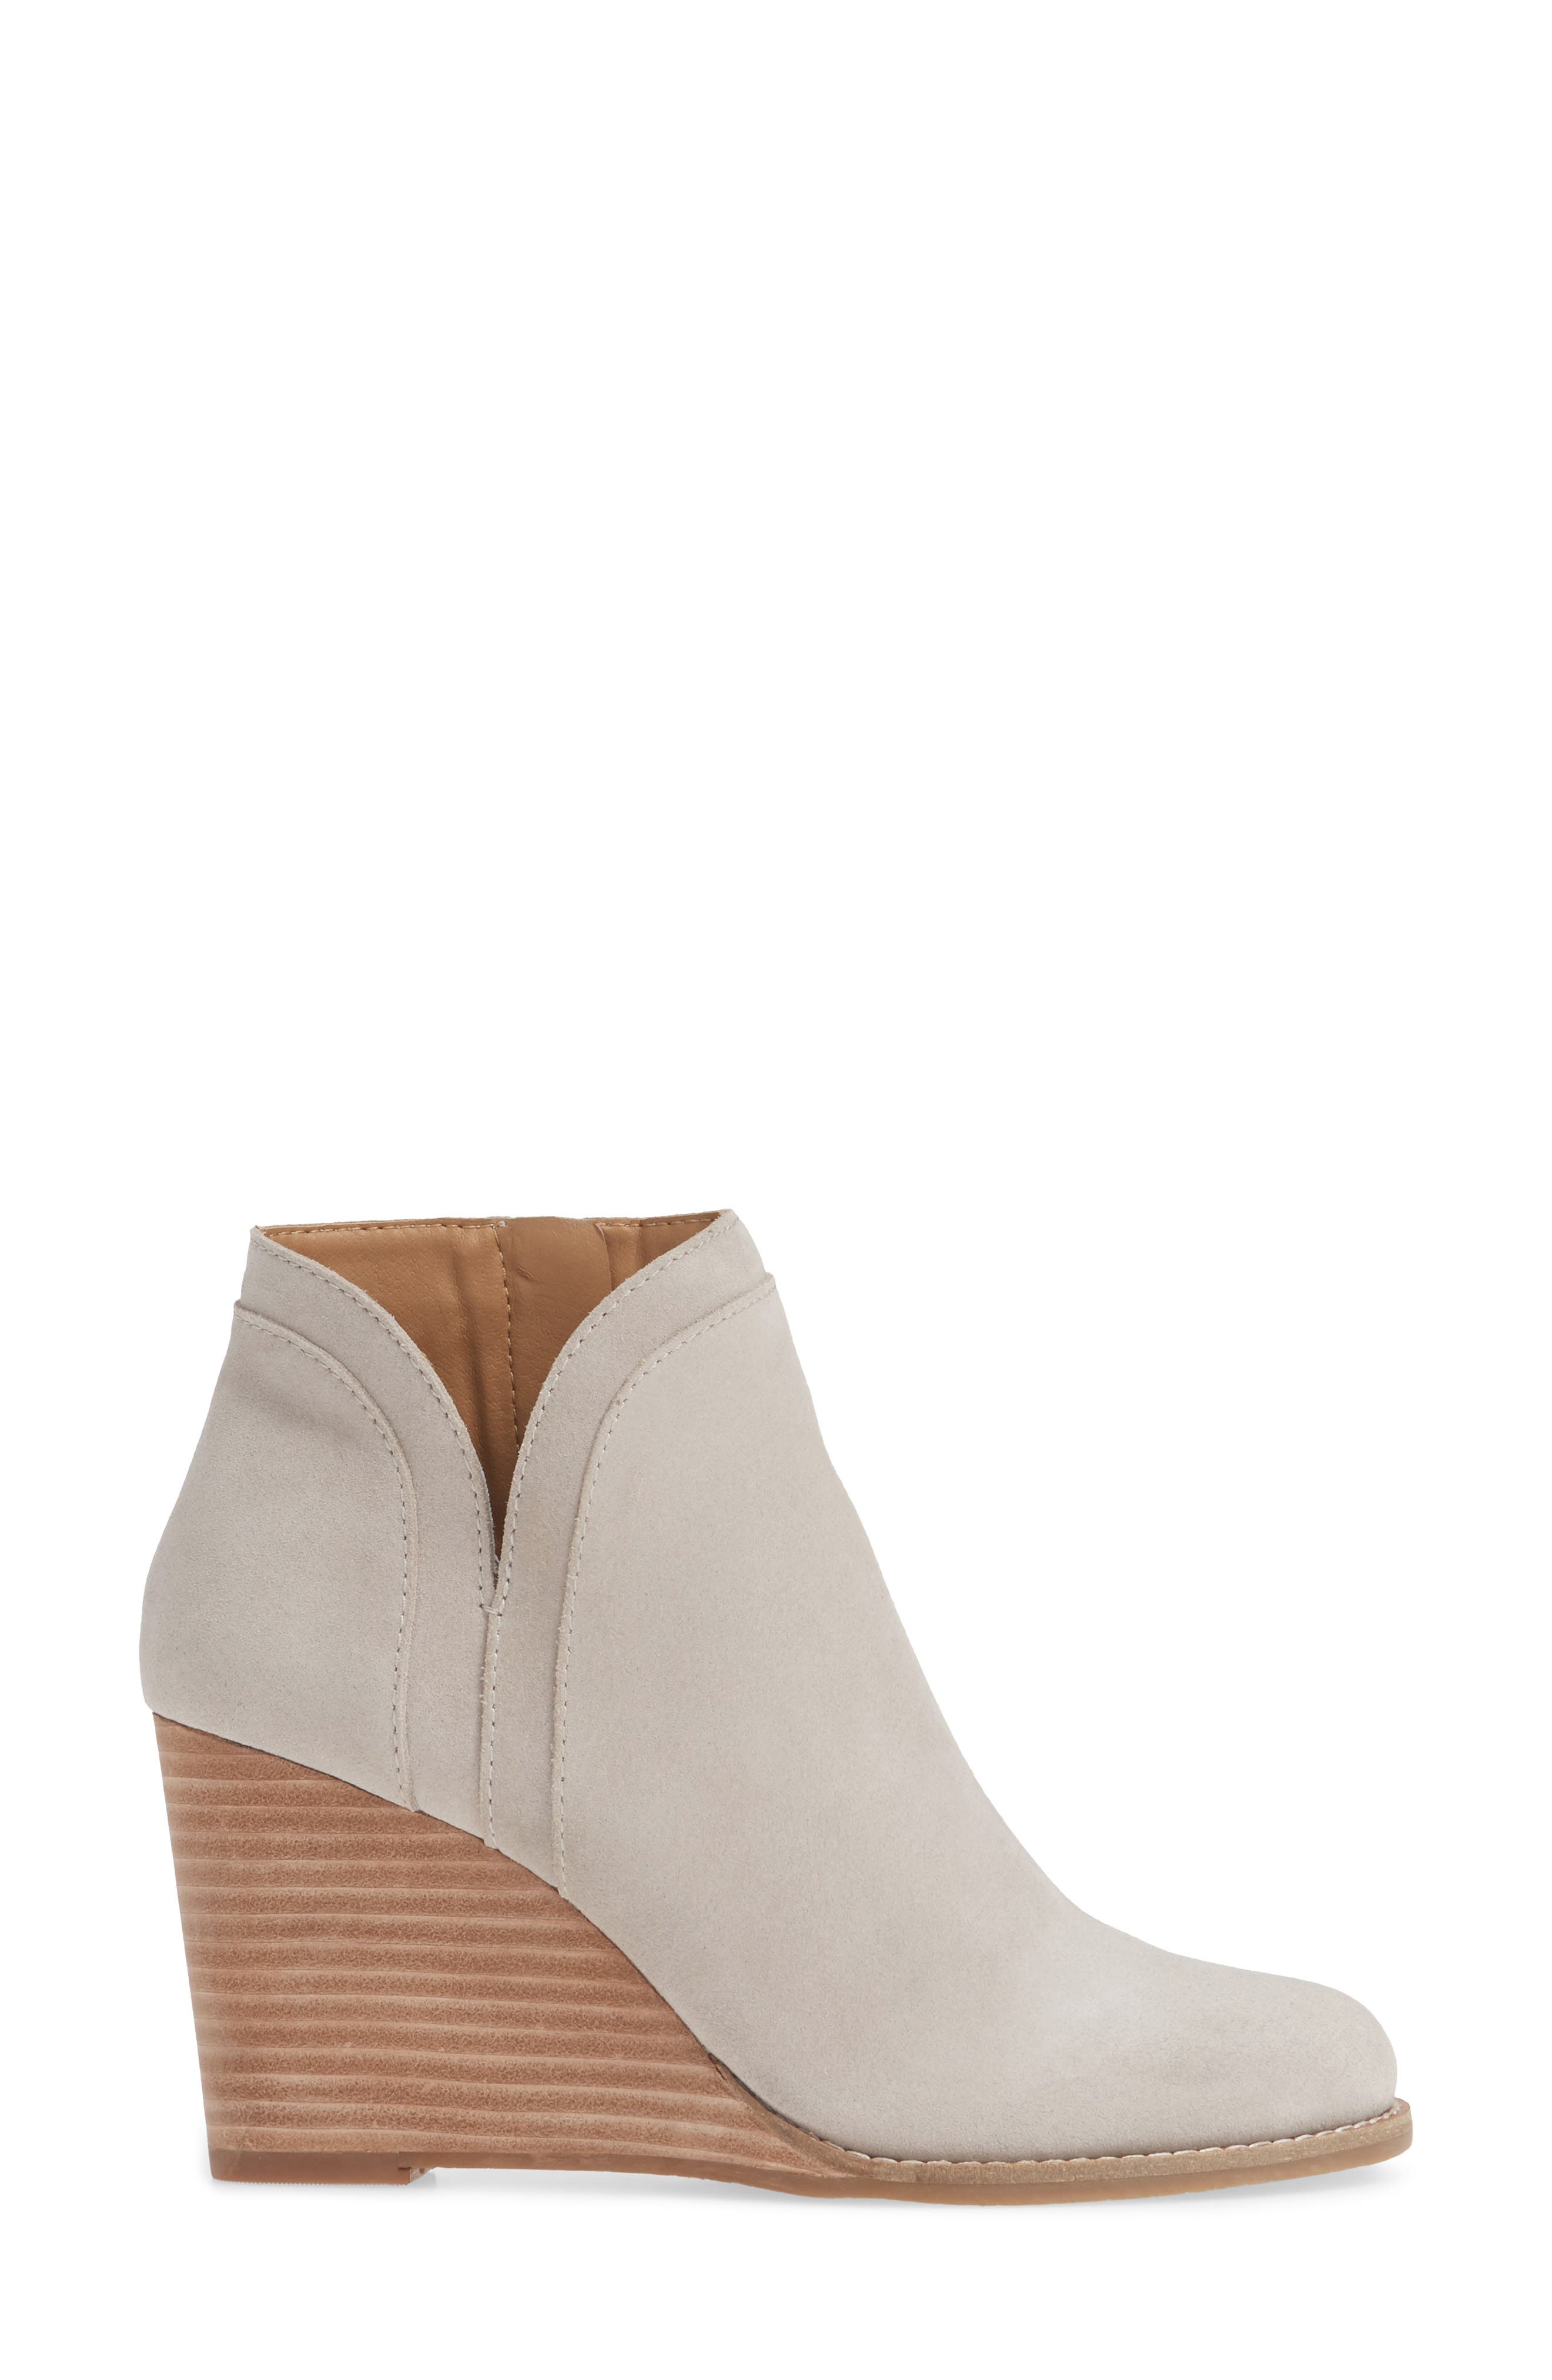 lucky brand wedge bootie